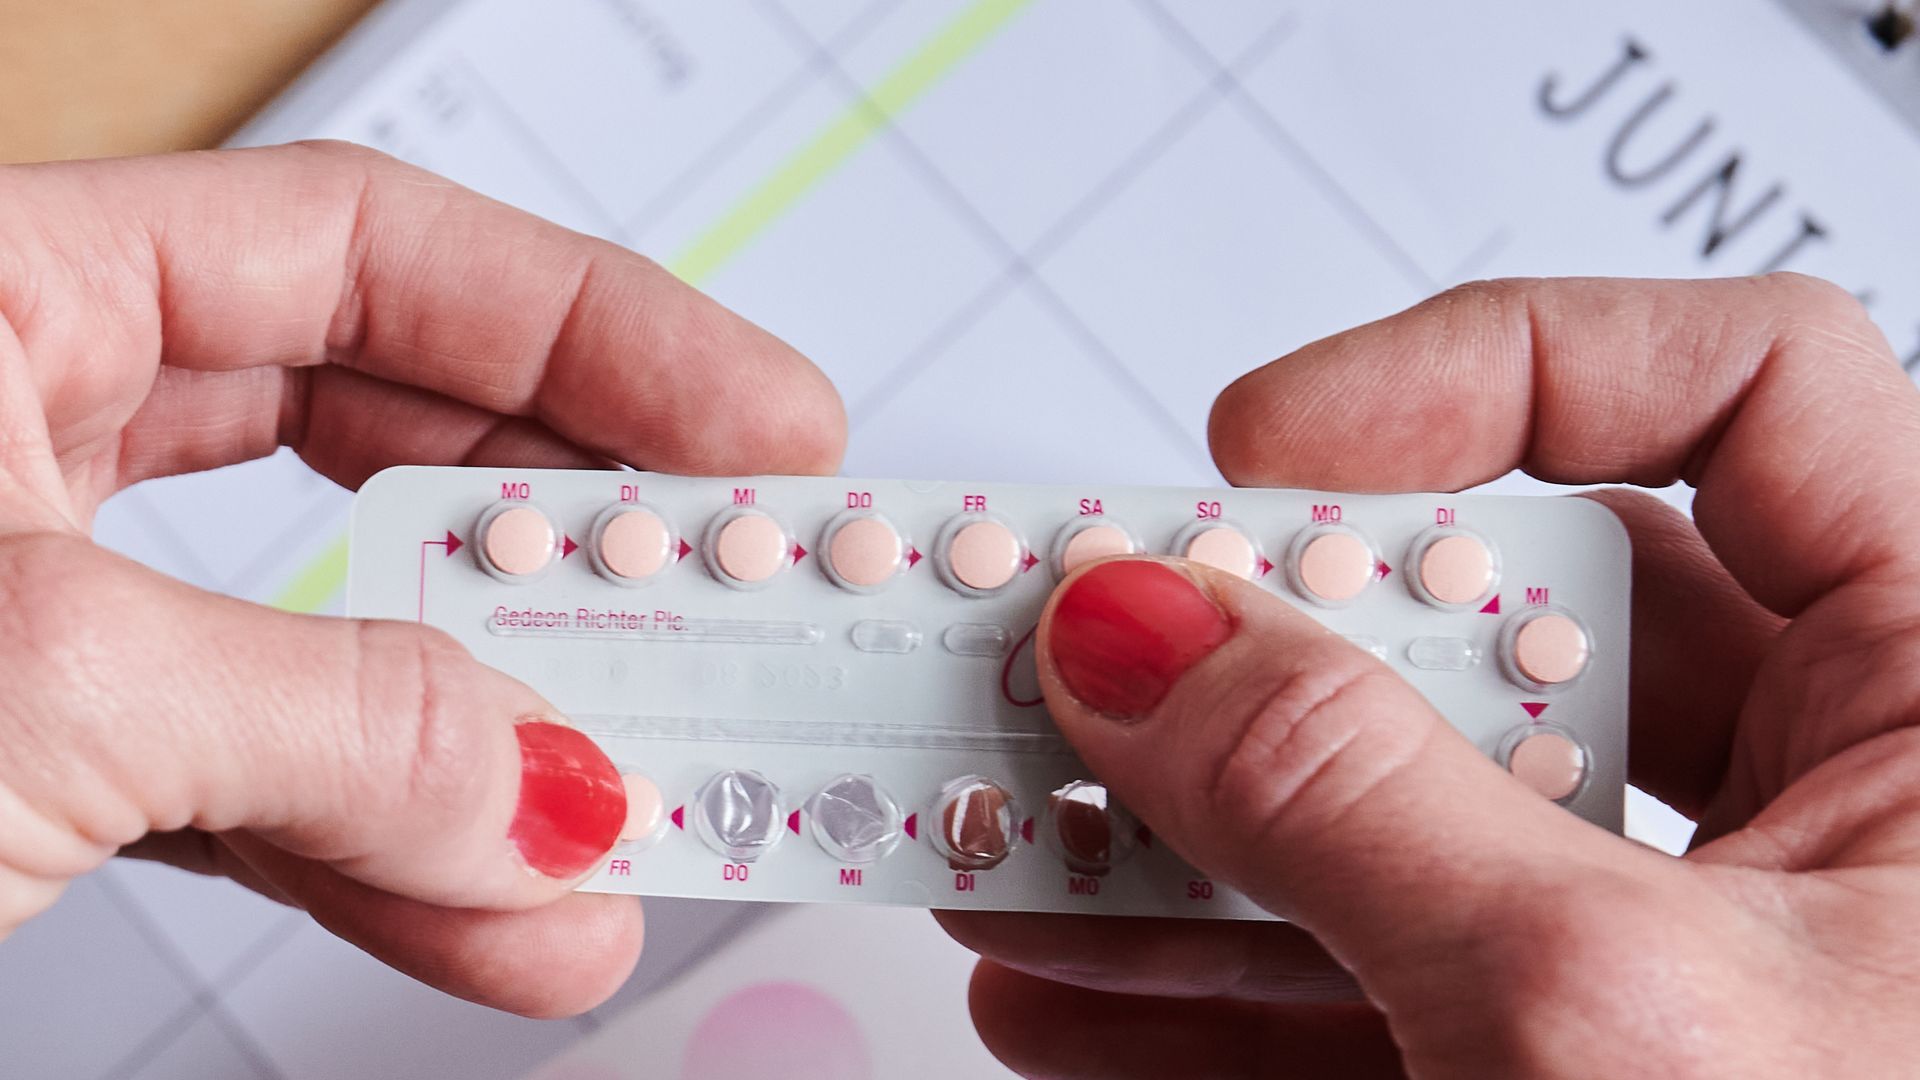 Social media trends are spreading disinformation about birth control. Get the right facts and be patient as you discover what works for you.